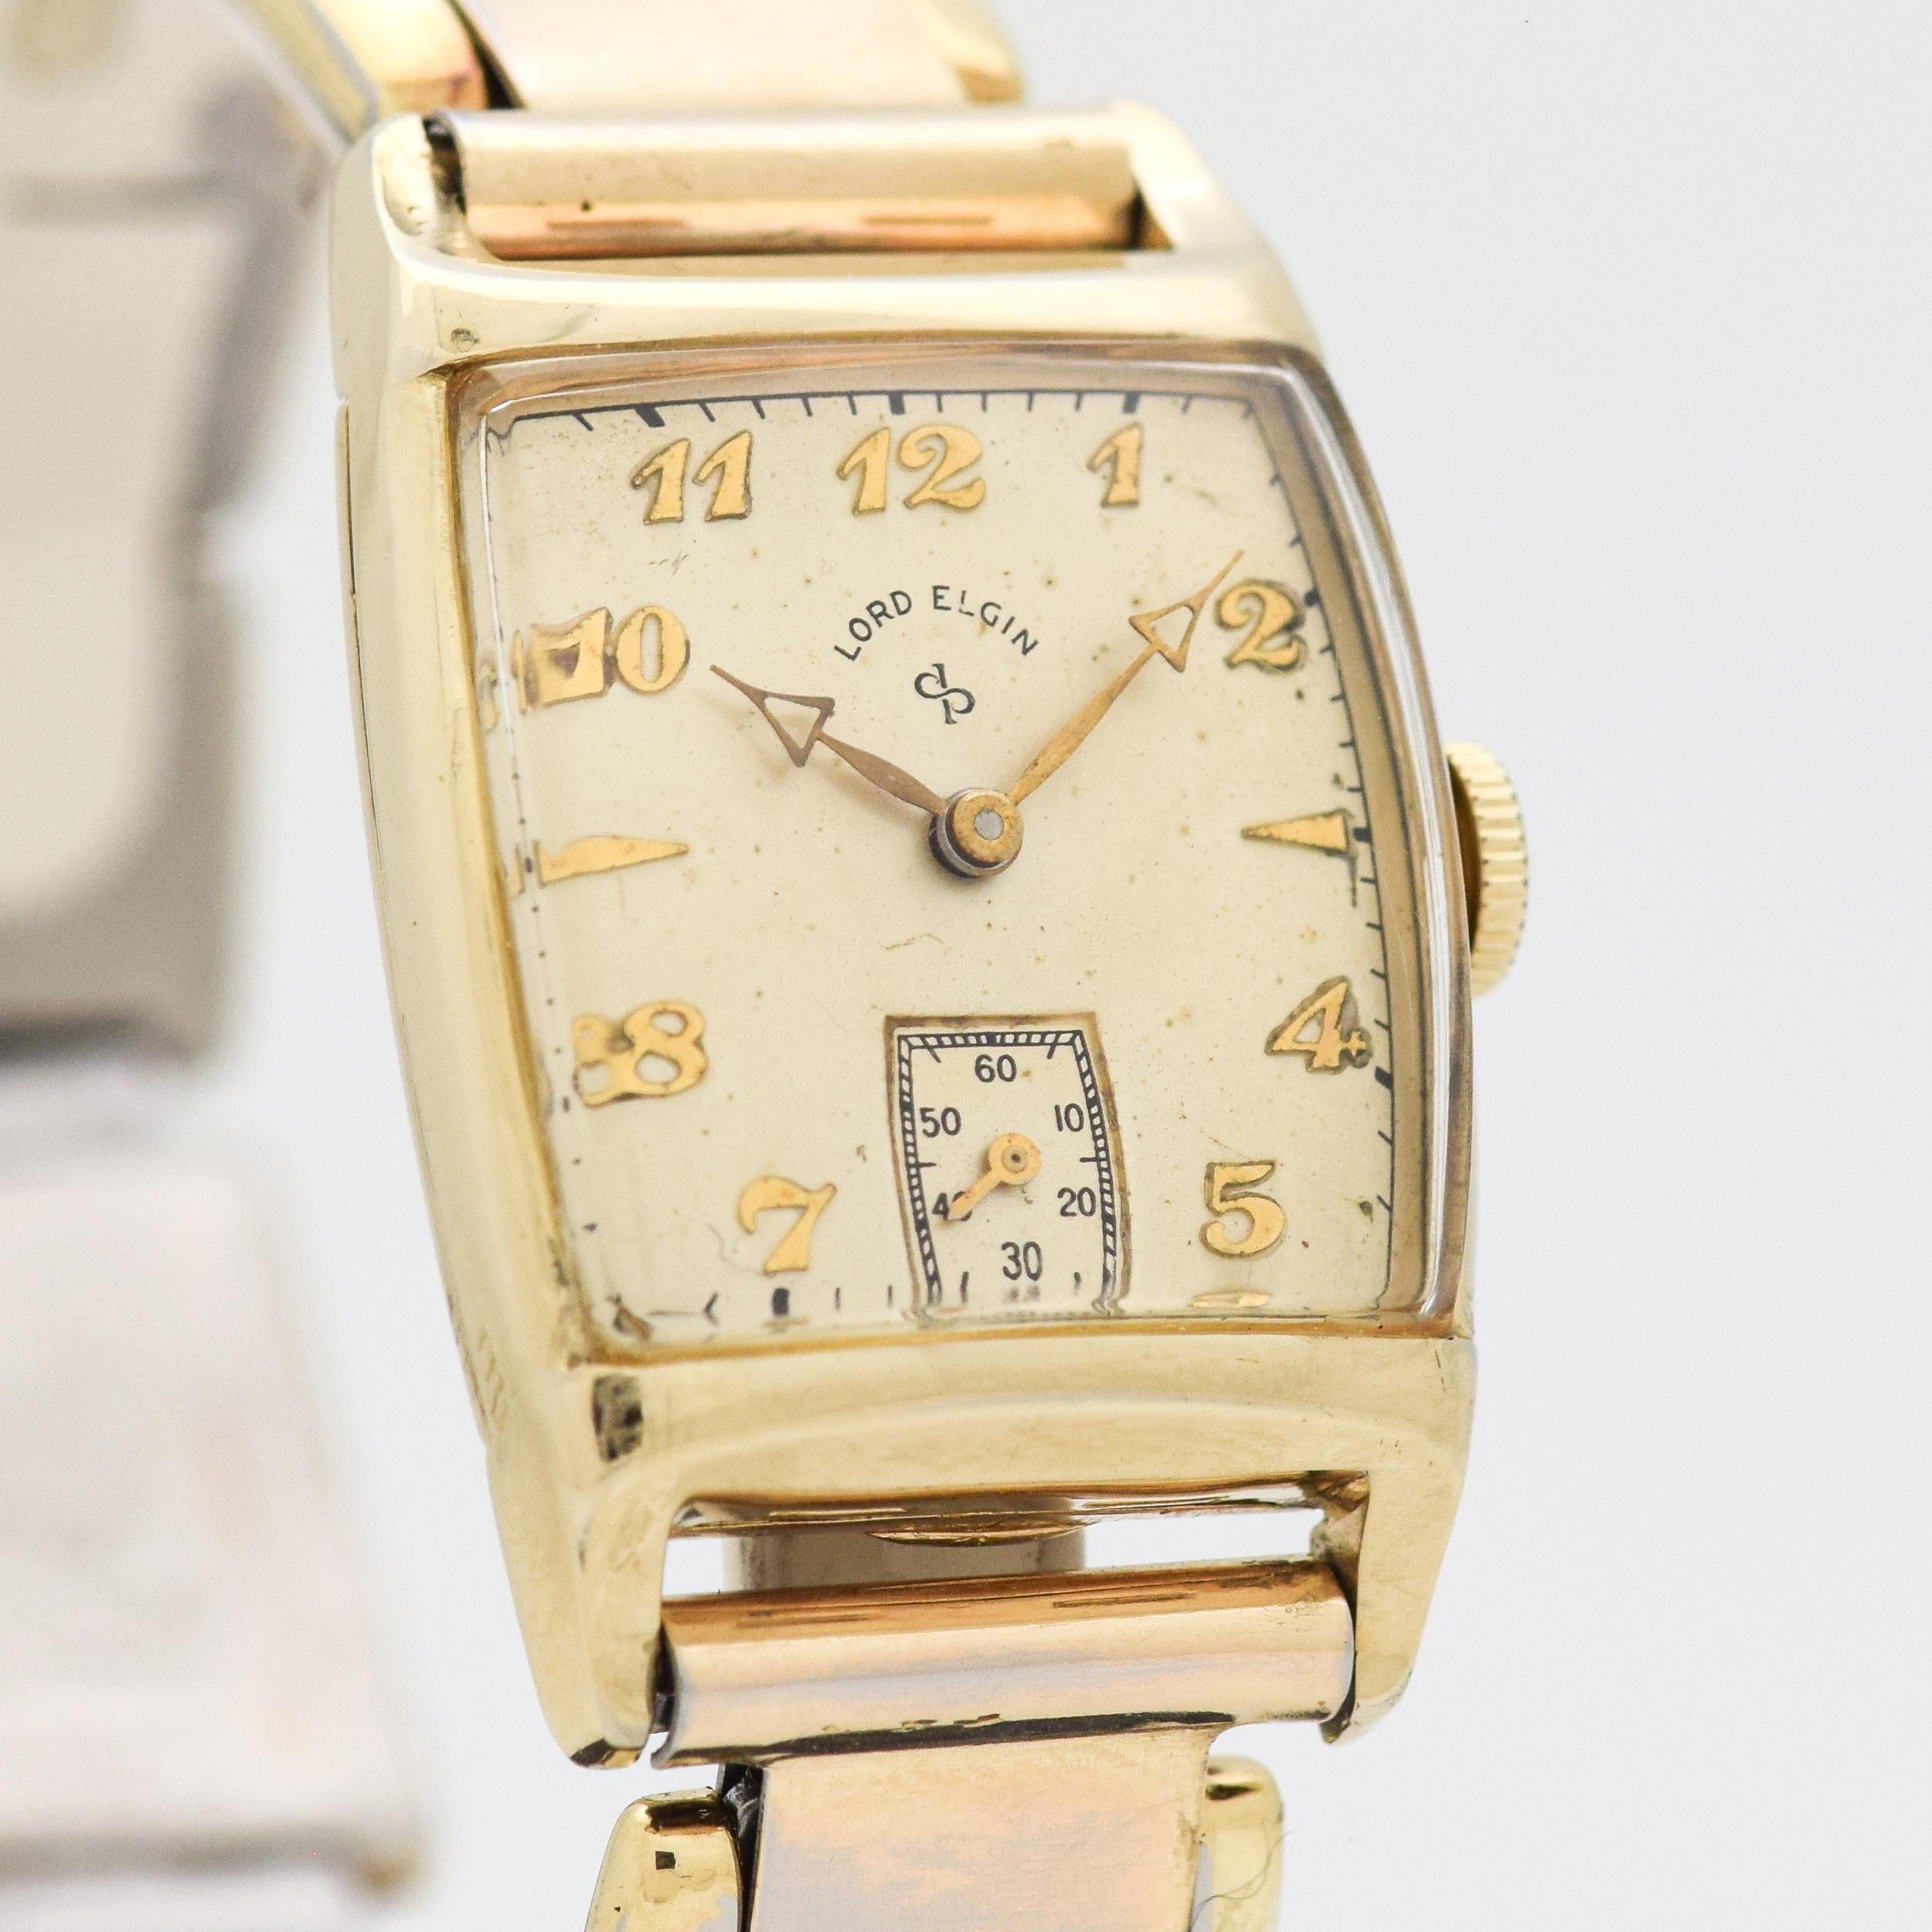 1949 Vintage Lord Elgin 14k Yellow Gold Filed watch with Original Silver Dial with Applied Breguet Arabic Gold Color Numbers and Elongated Triangles with Time Period Correct 14k Yellow Gold Filled Stretchy Bracelet. 24mm x 37mm lug to lug (0.94 in.